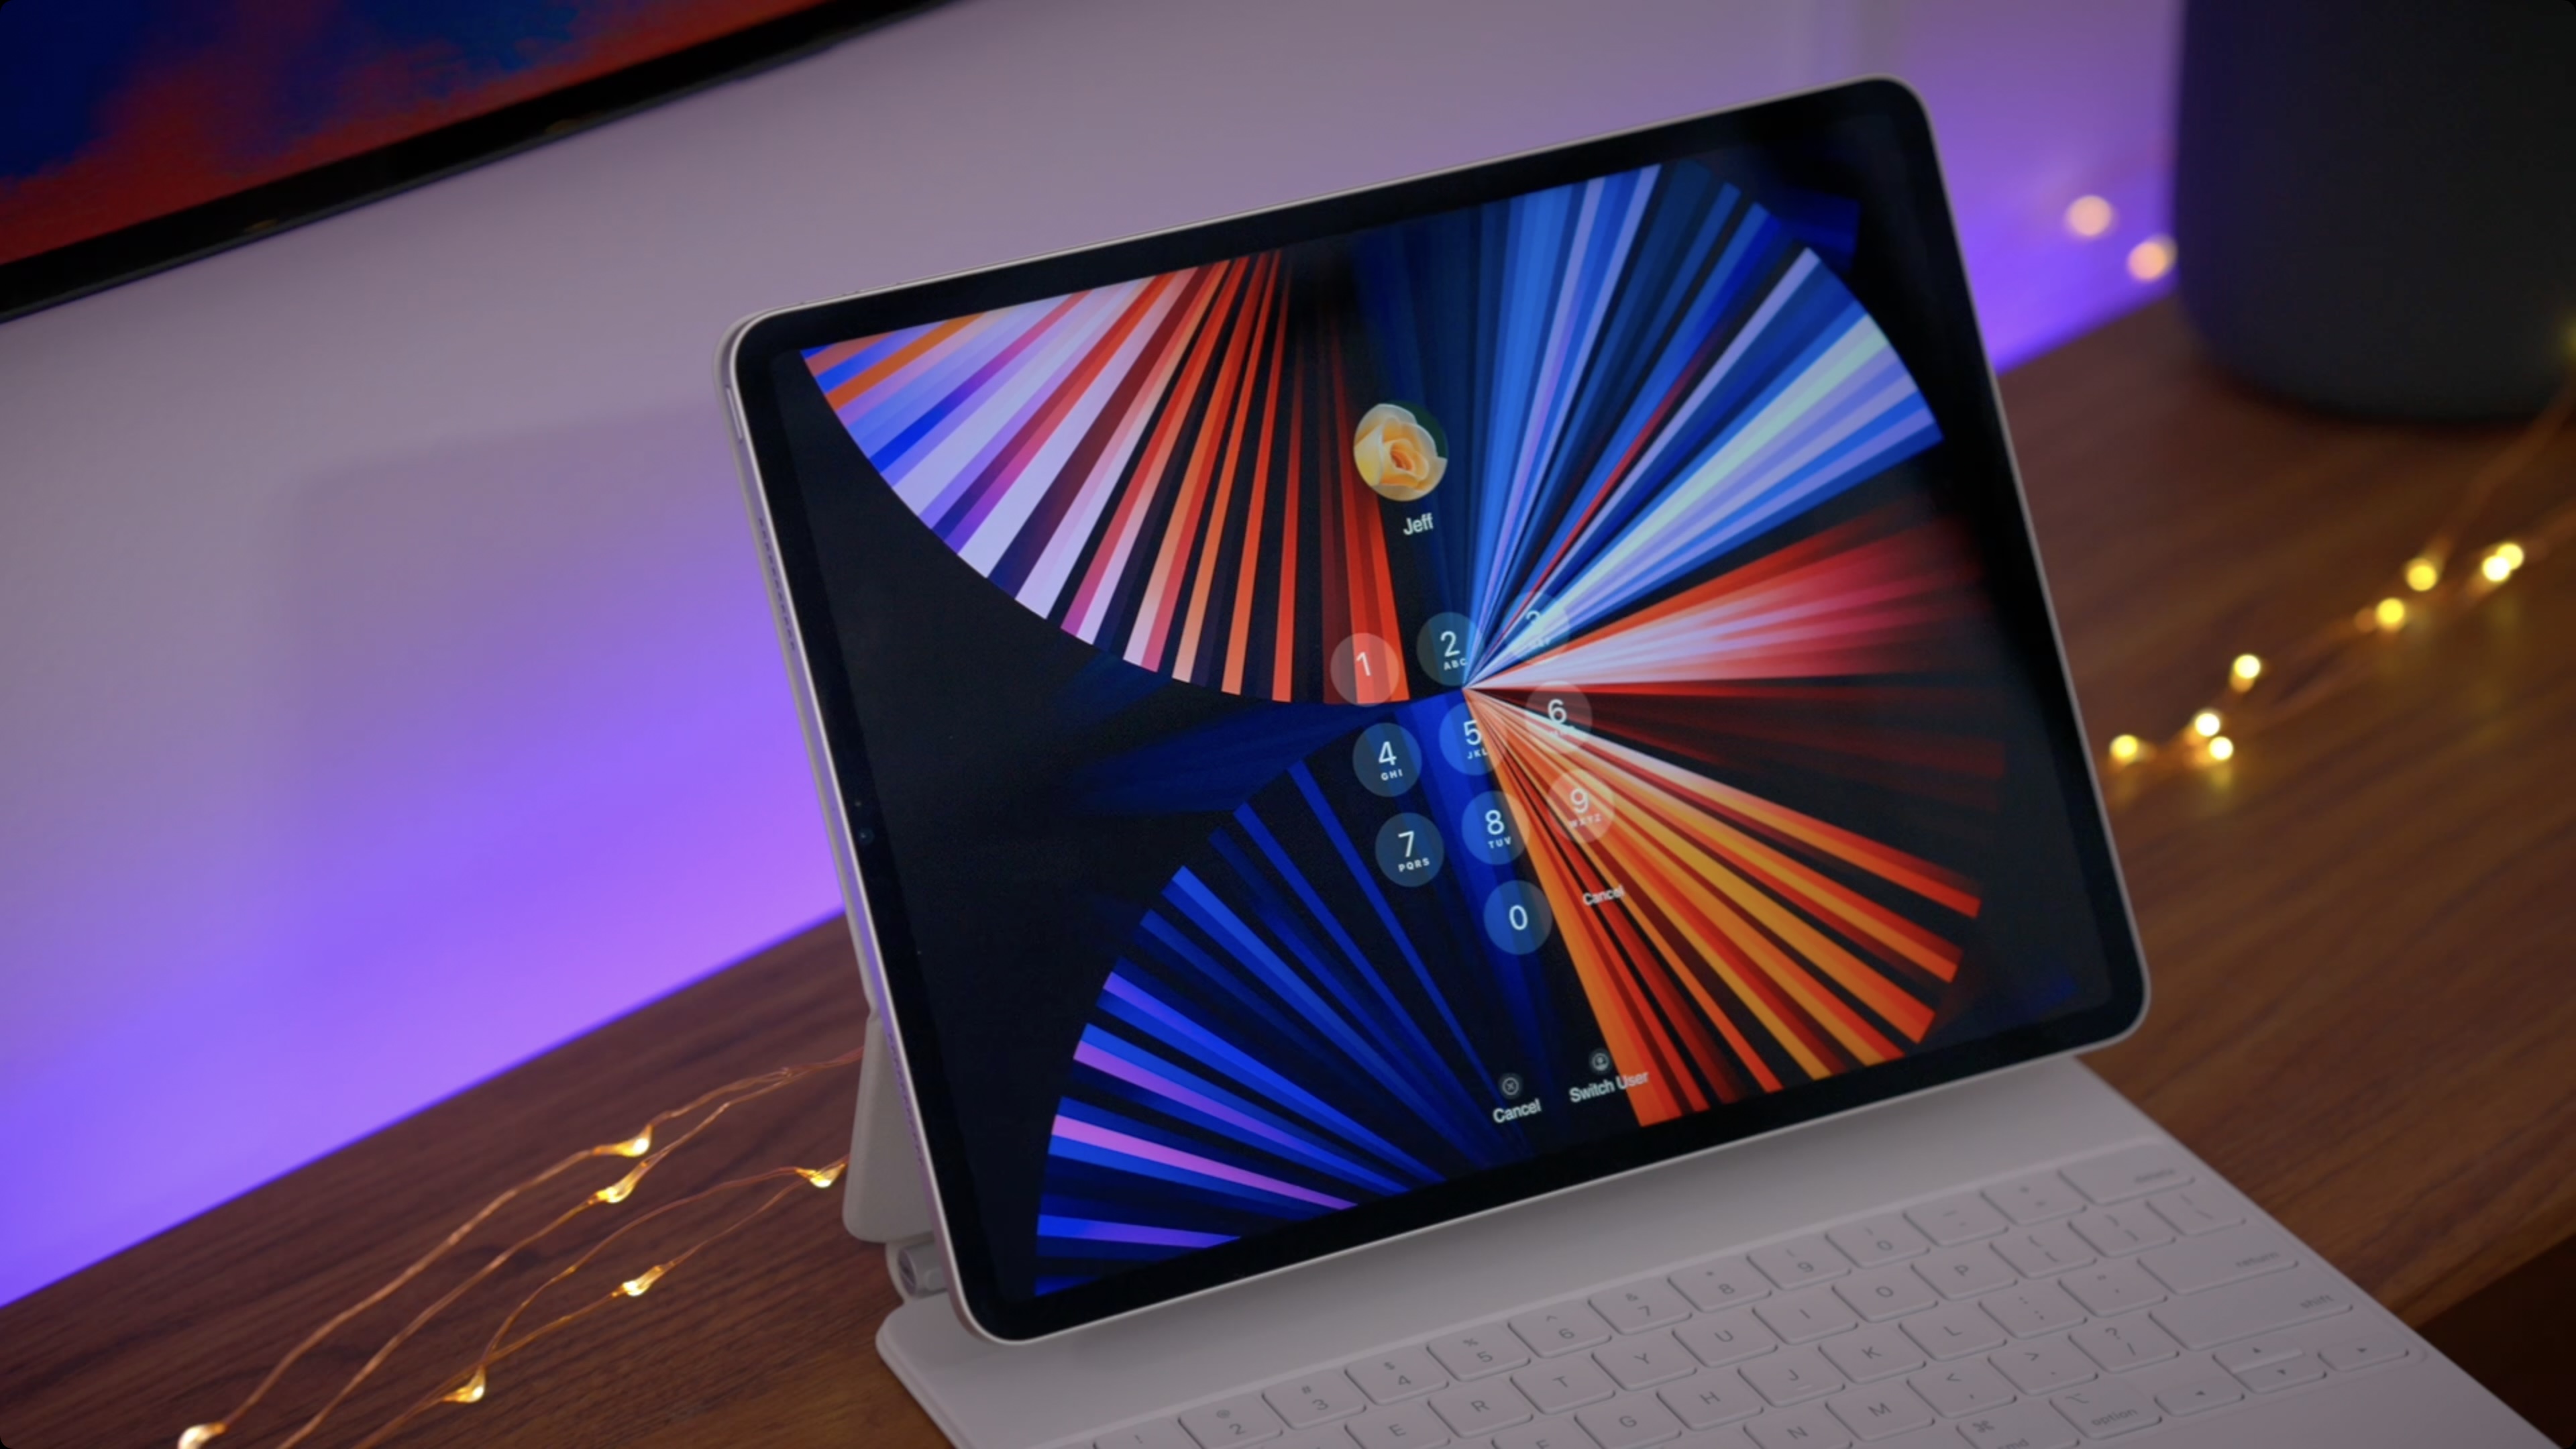 Apple iPad Pro review: New screen, 5G and M1 chip, but FYI it's still not a  Mac - CNET